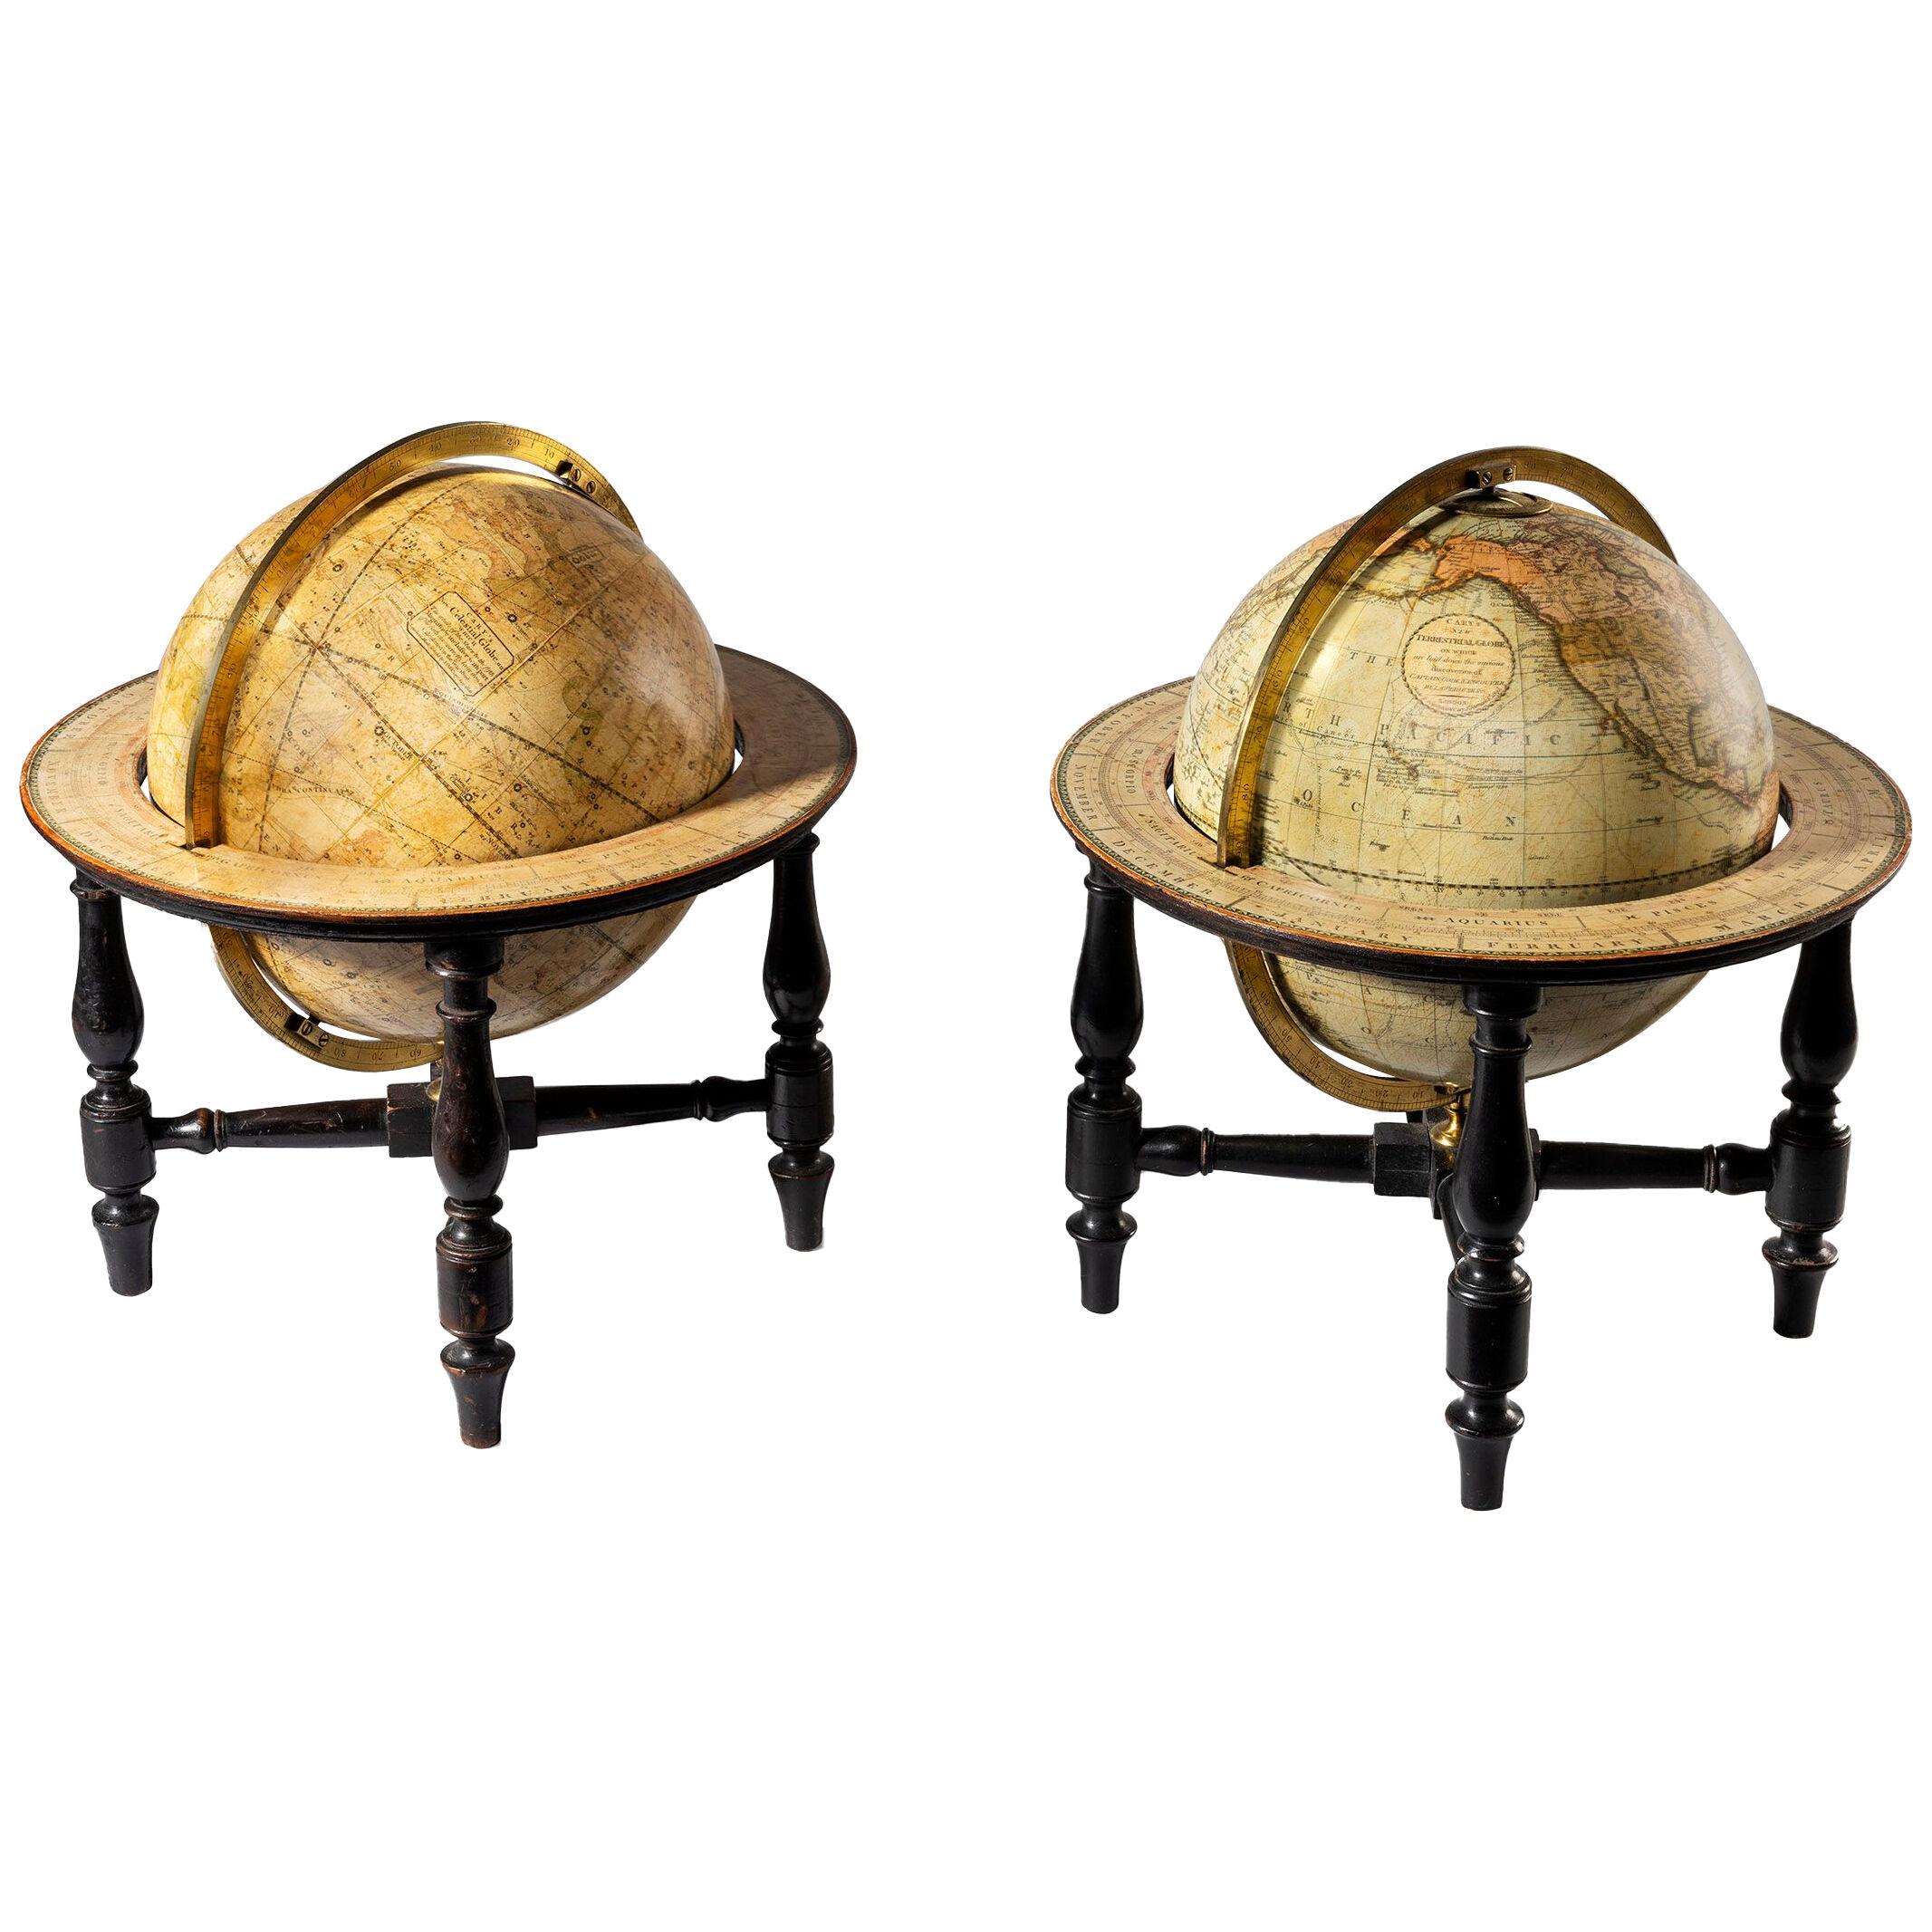 19th century pair of table globes by J.W Cary